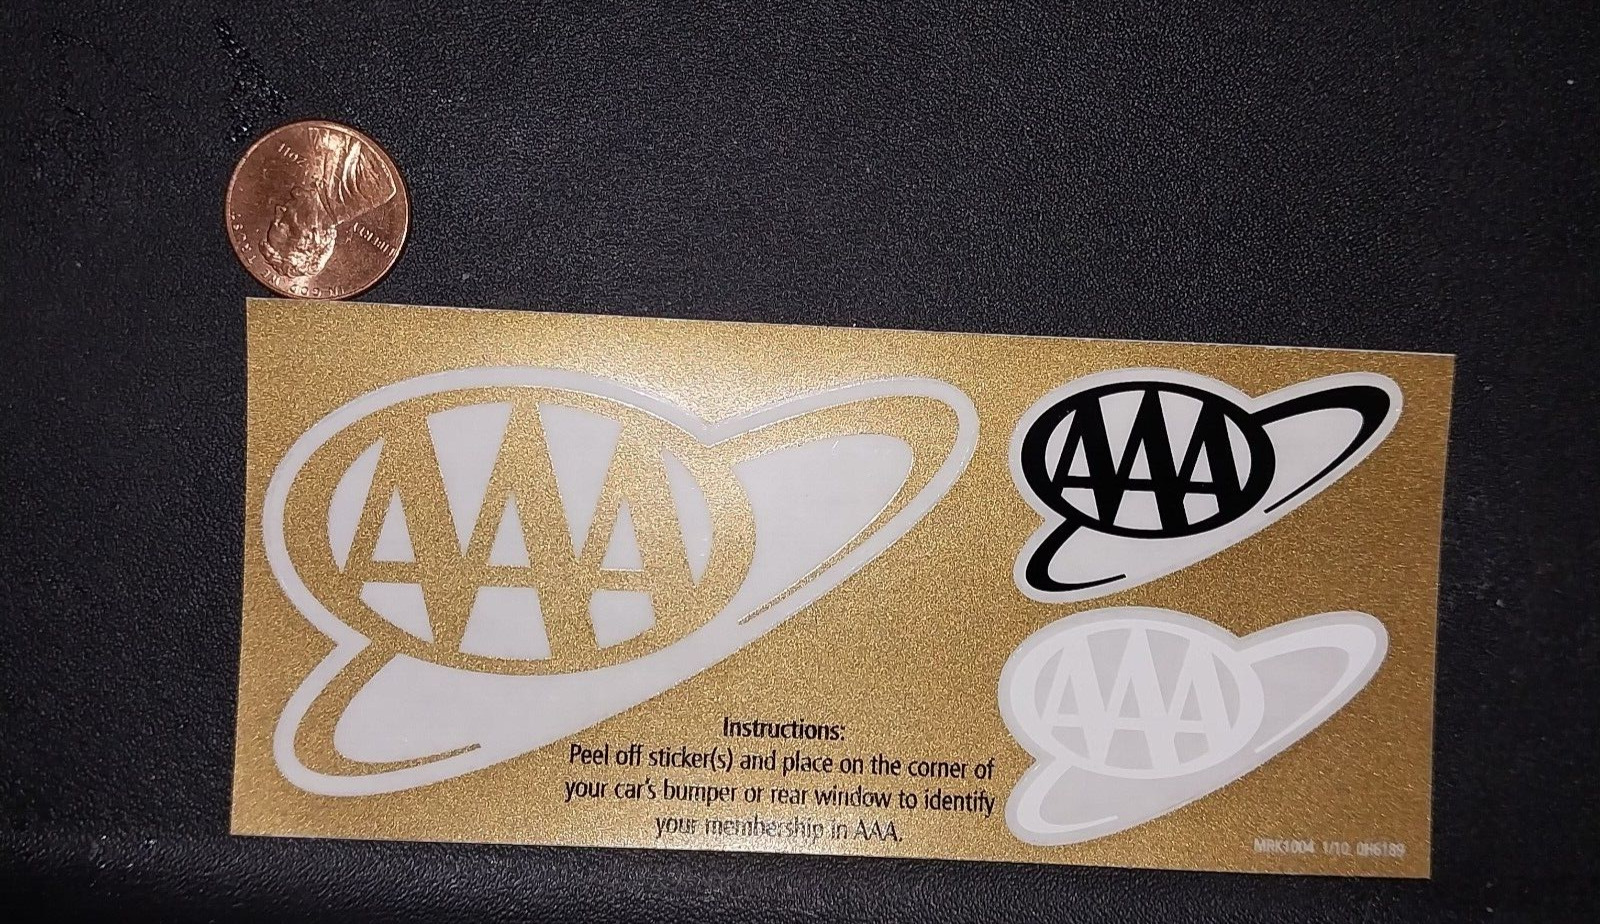 VINTAGE GOLD AAA Sticker / Decal  RACING ORIGINAL old stock